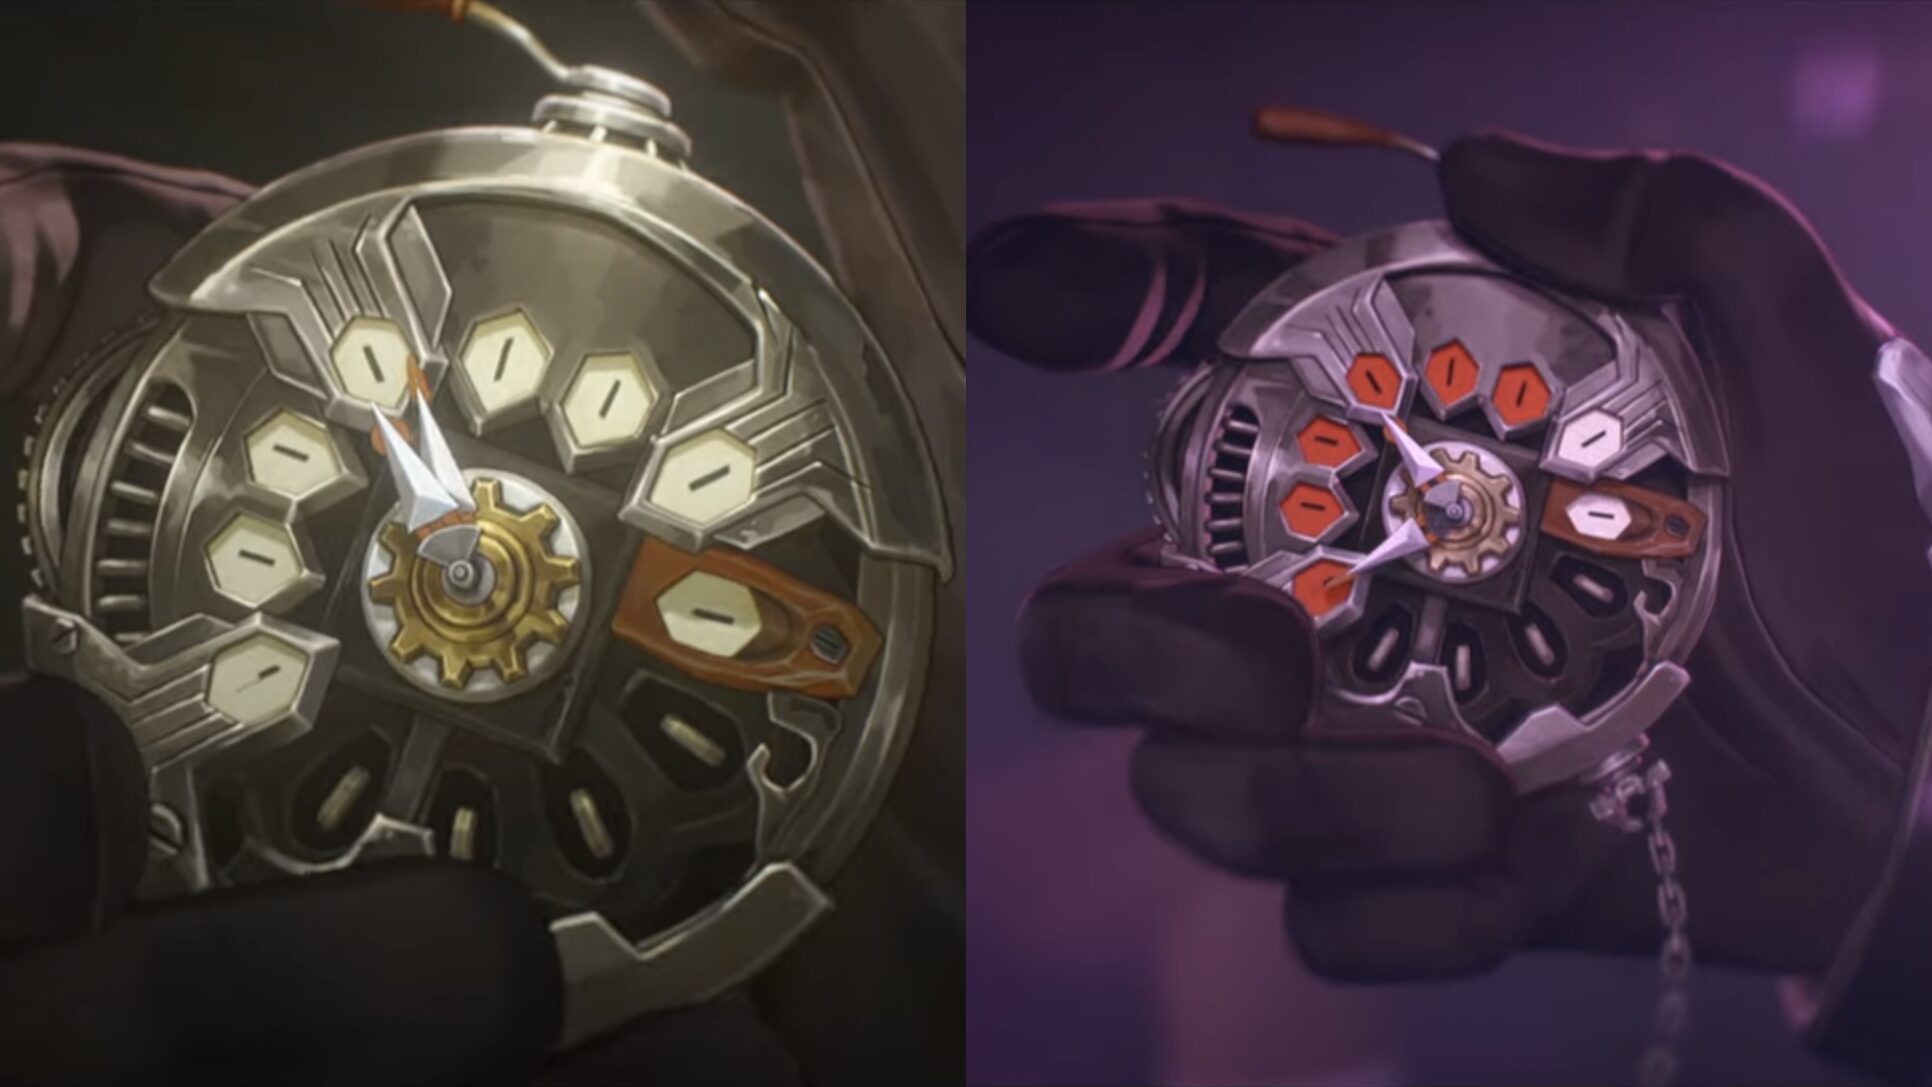 Is Ekko the Firelight Leader in Act 2 of Arcane? The character used an intricate watch.